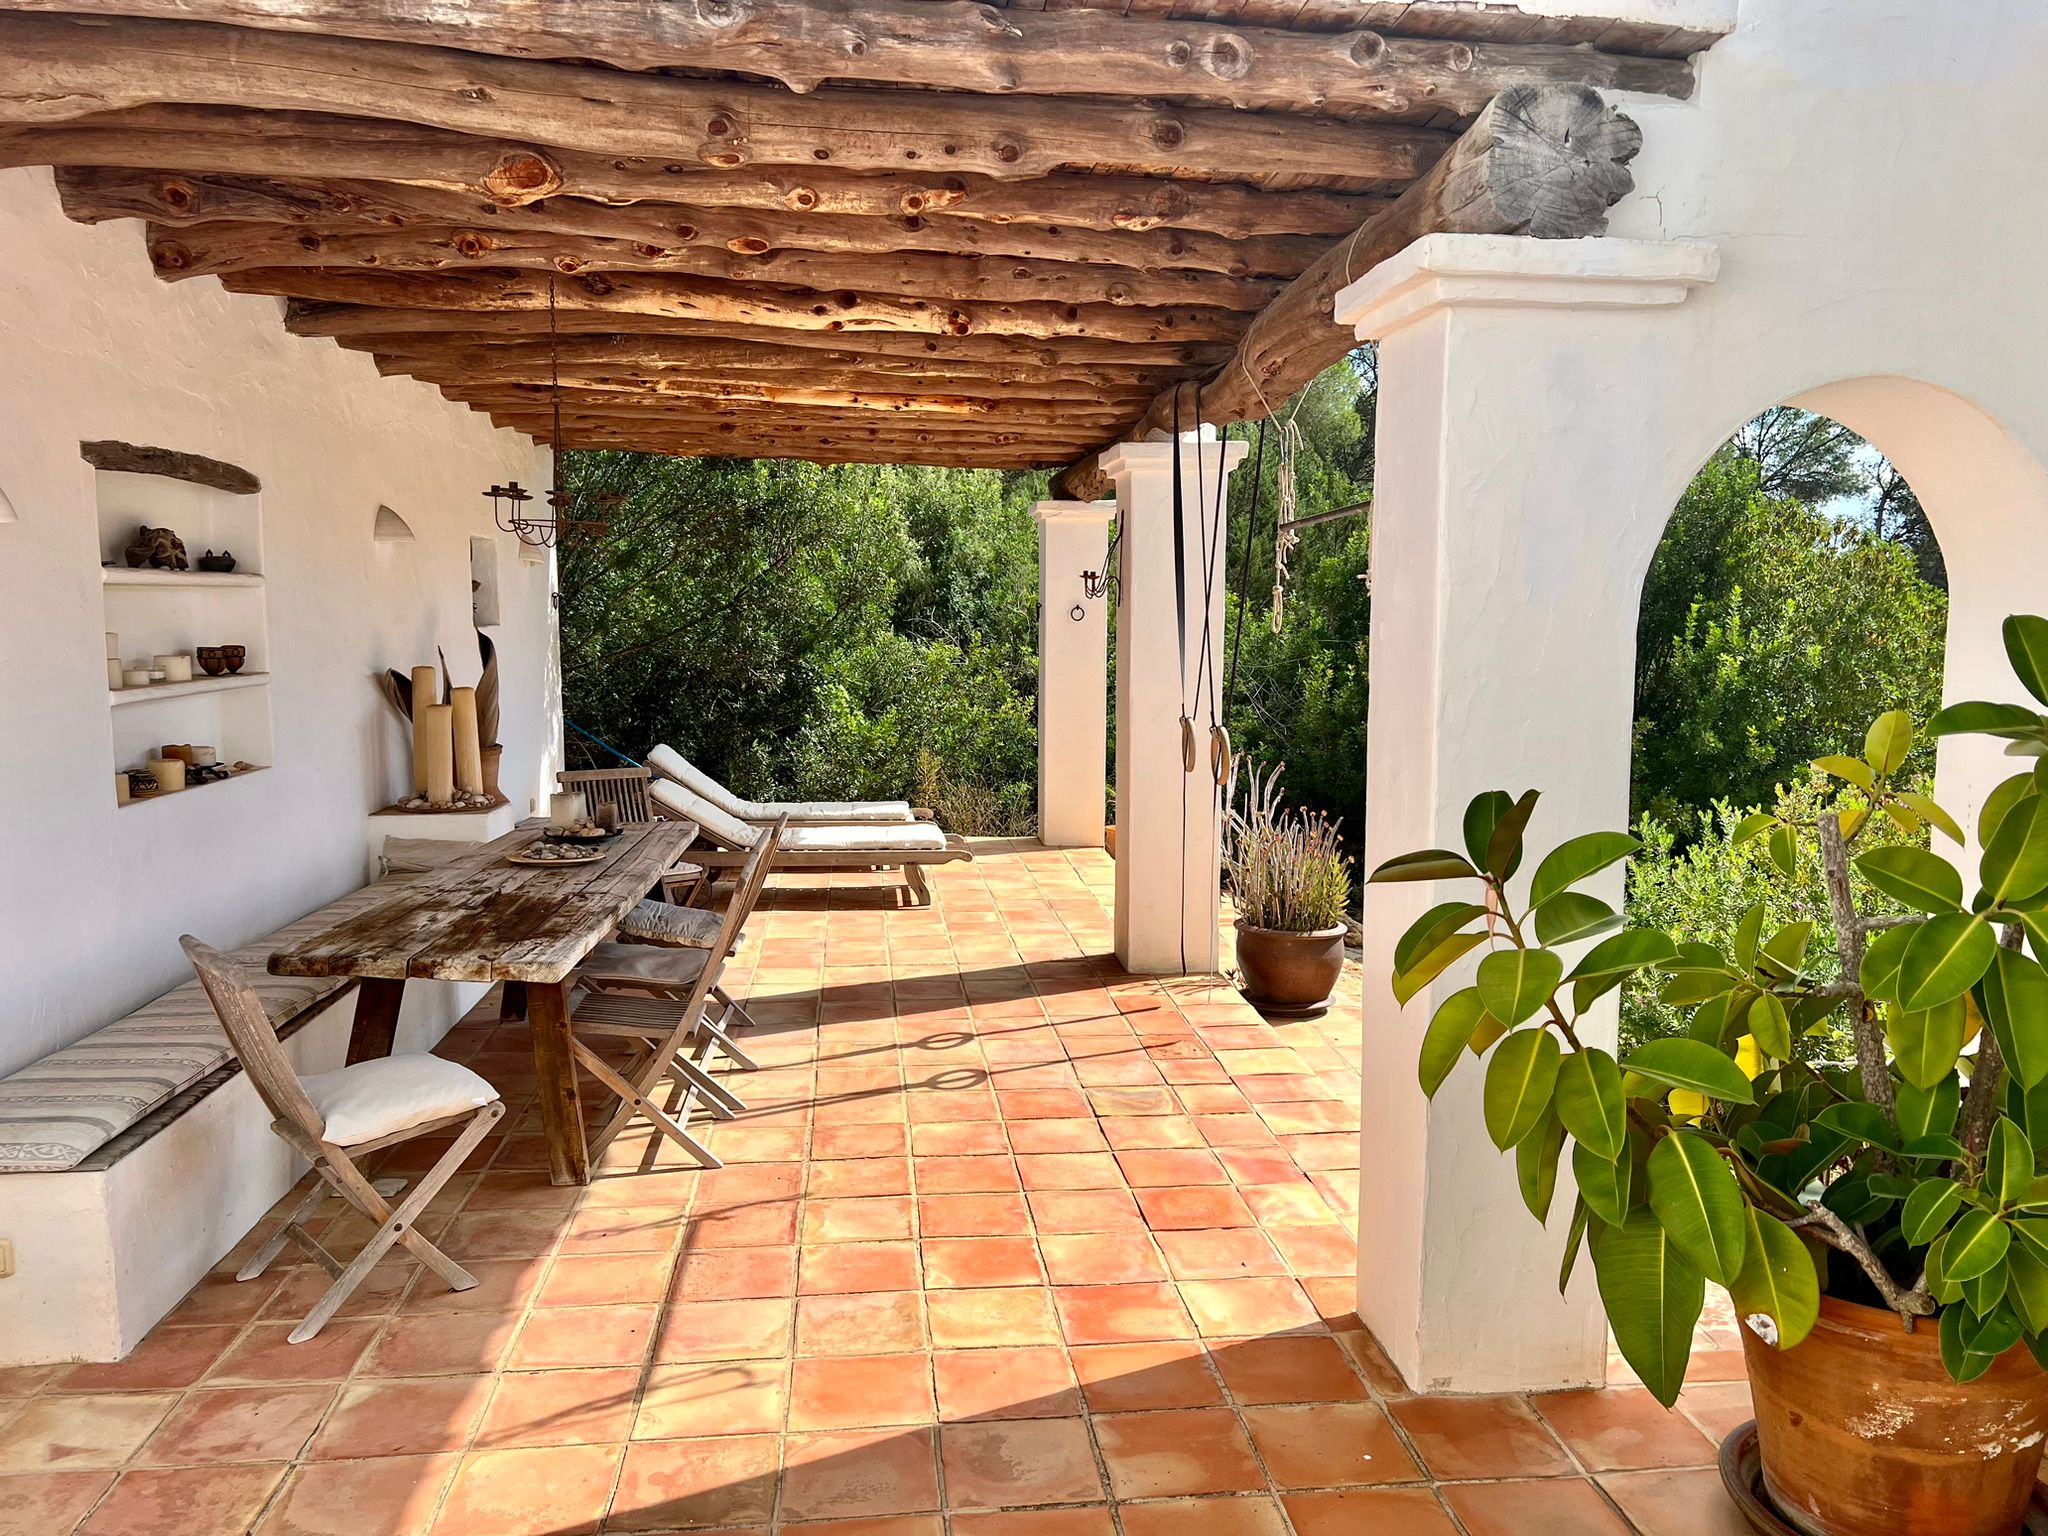 Finca with 6 bedrooms located on the bank of the torrent of cala Jondal